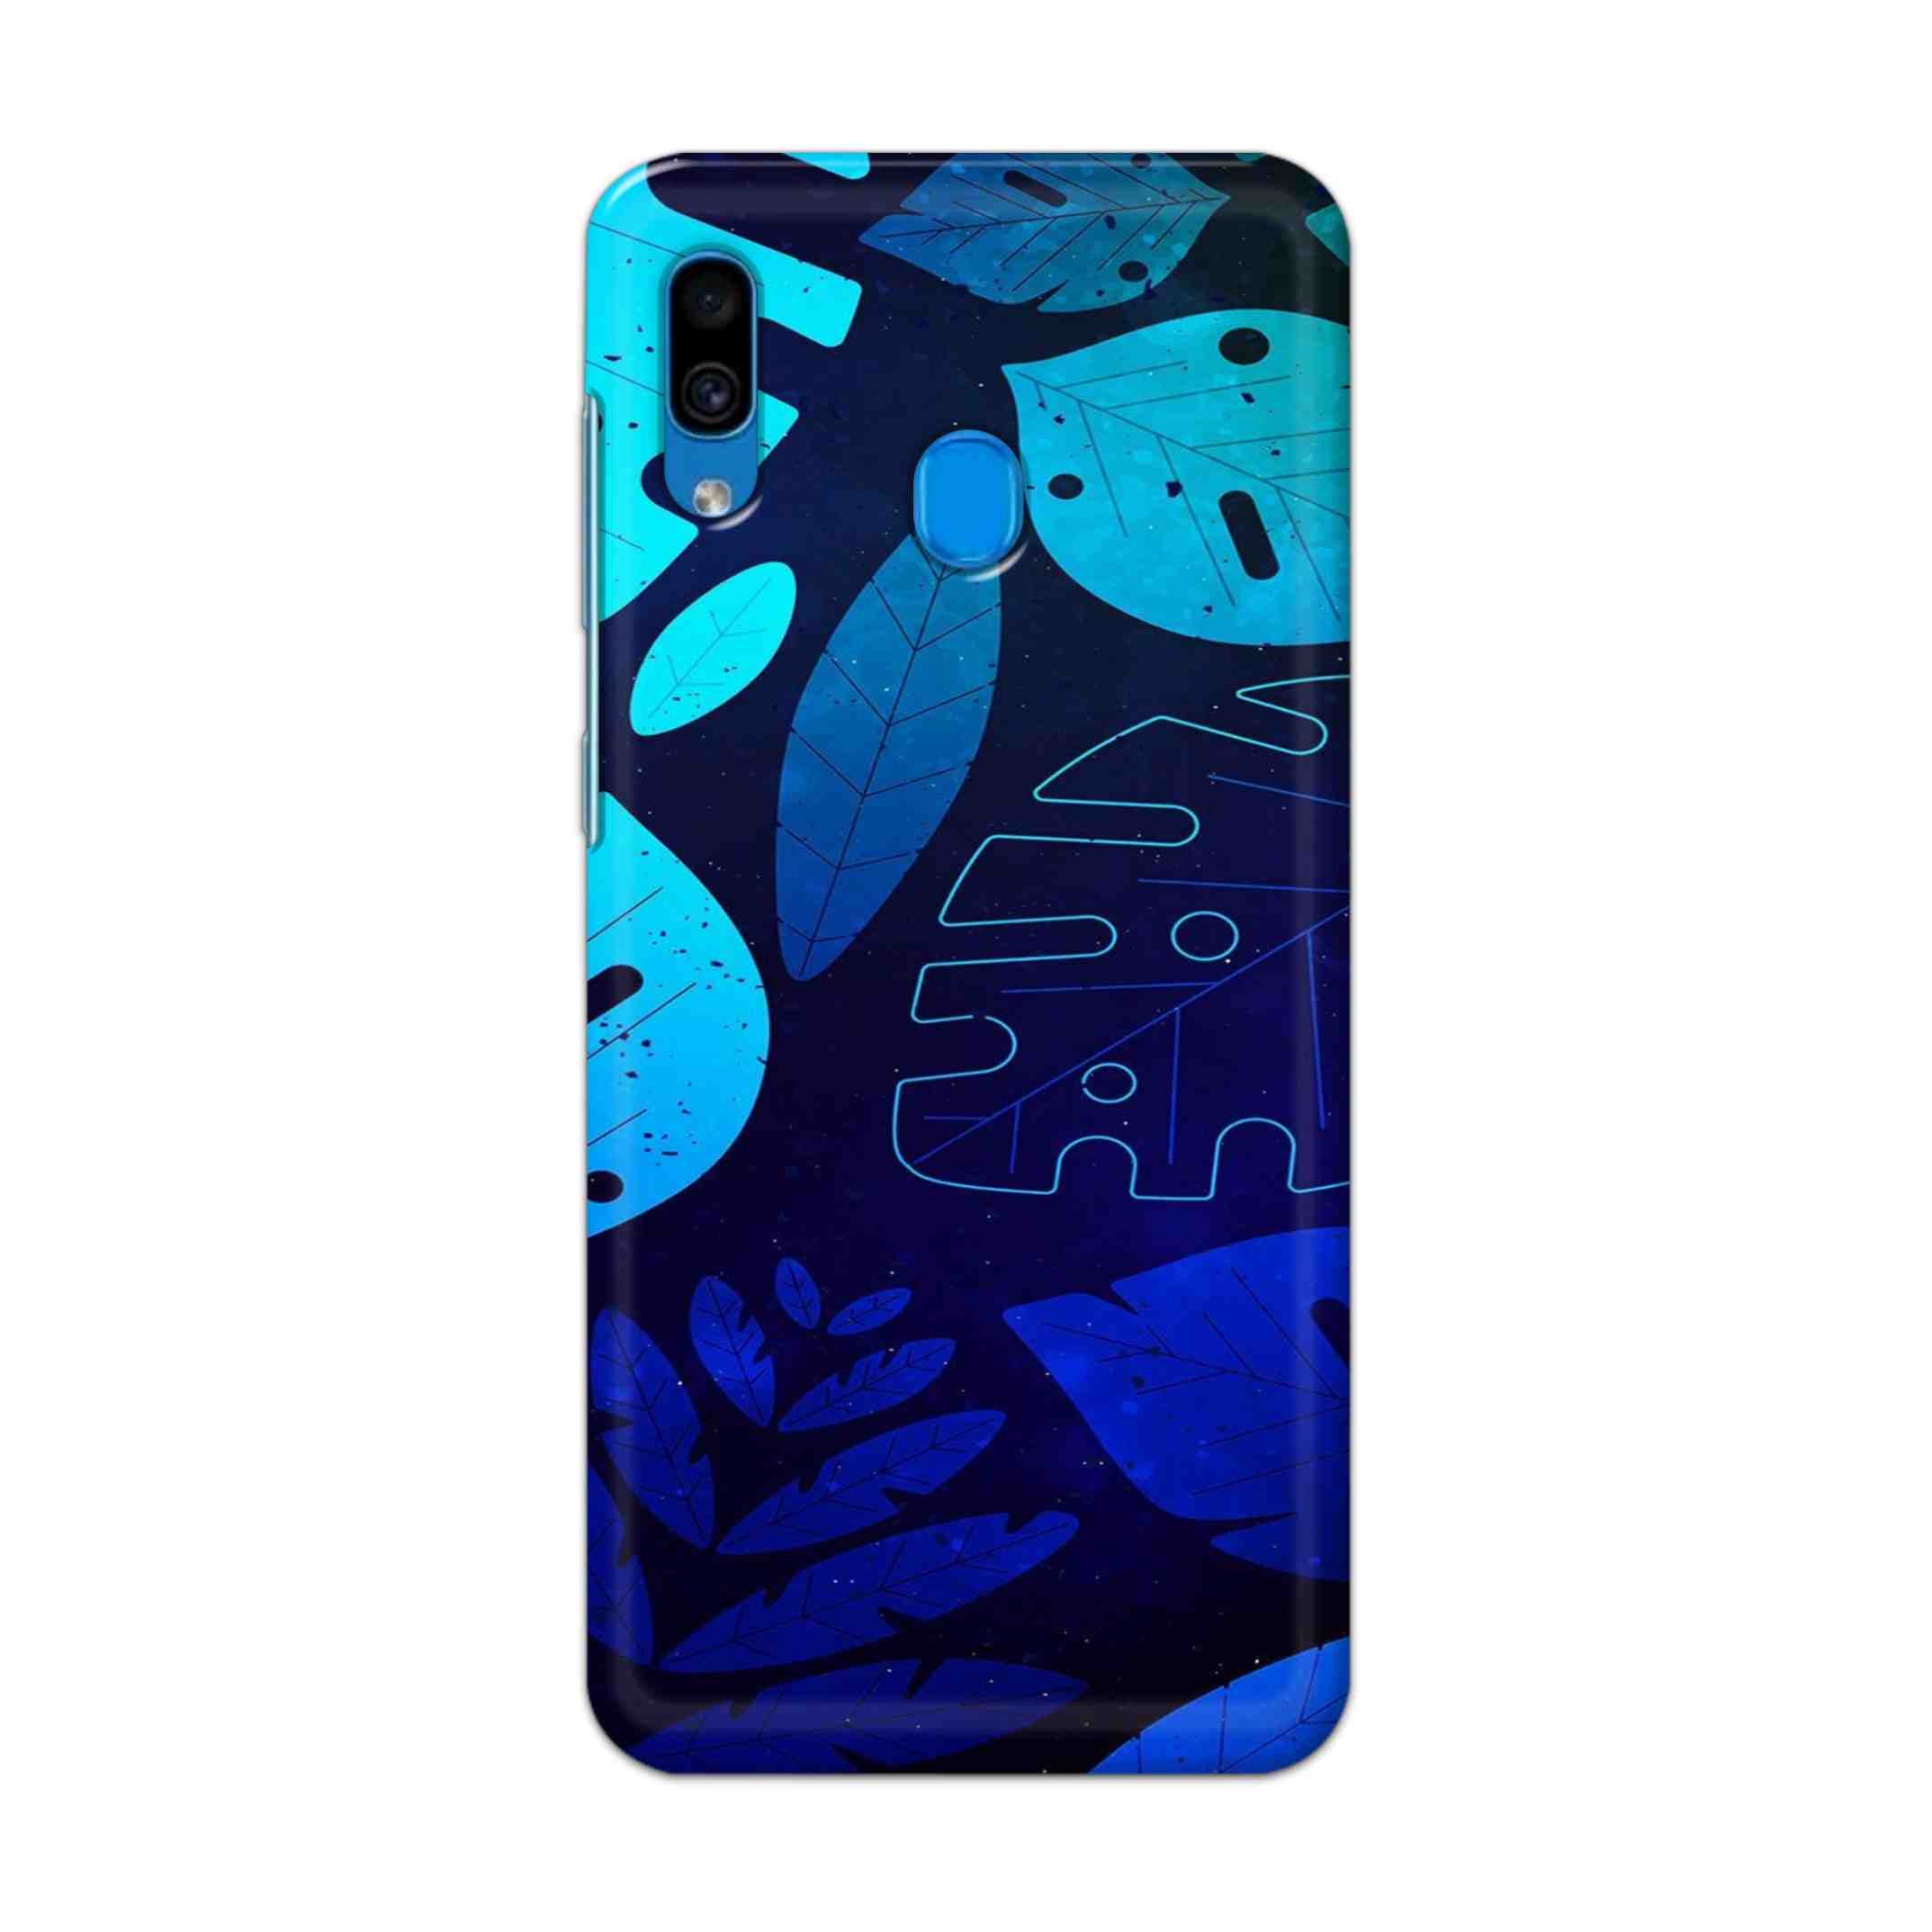 Buy Neon Leaf Hard Back Mobile Phone Case Cover For Samsung Galaxy A30 Online